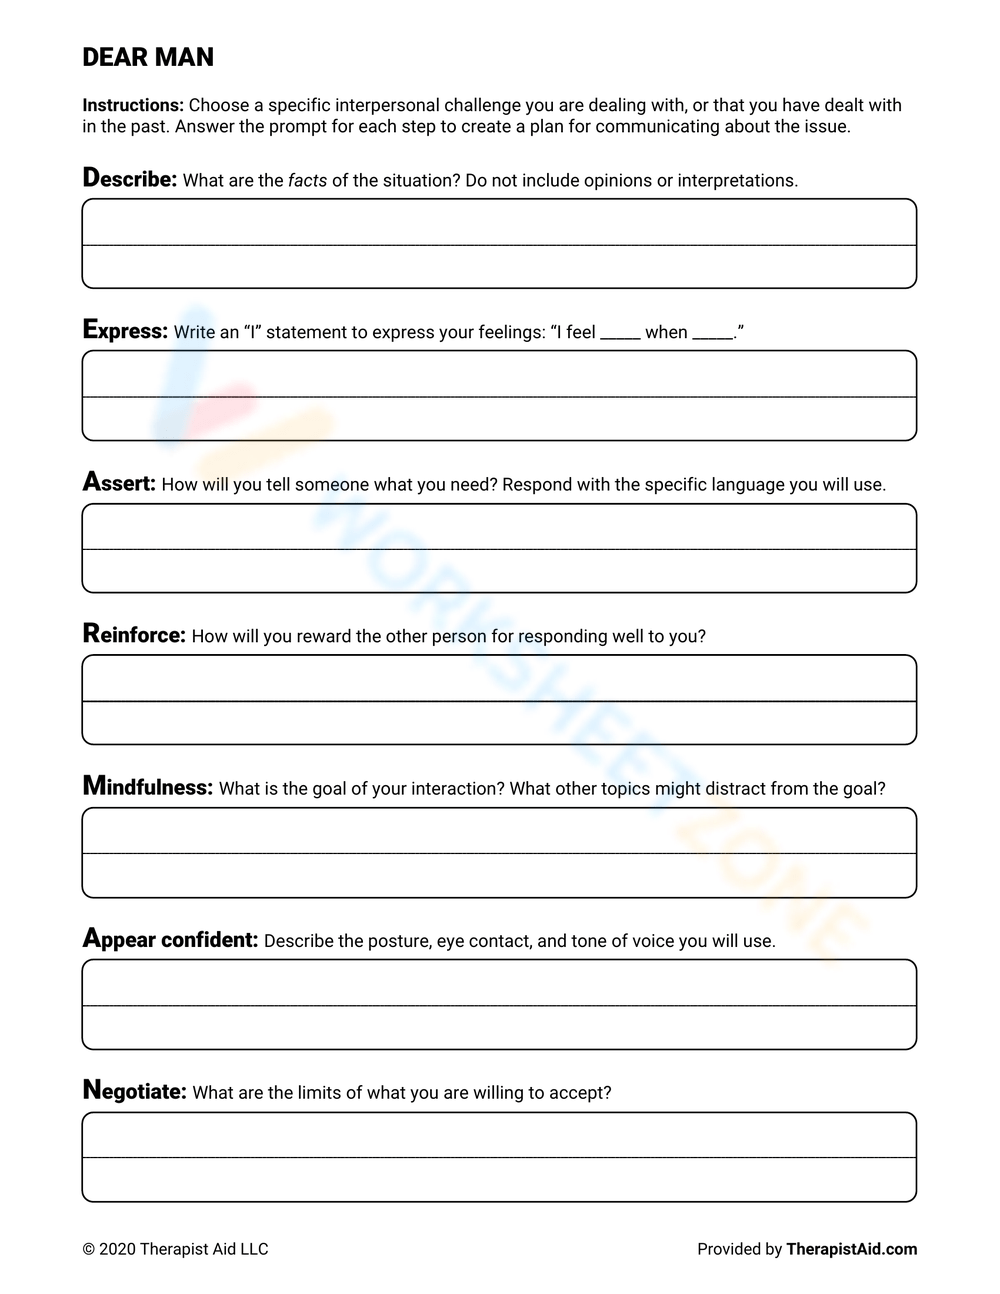 10 Free Collection Of Dear Man Worksheets For Students